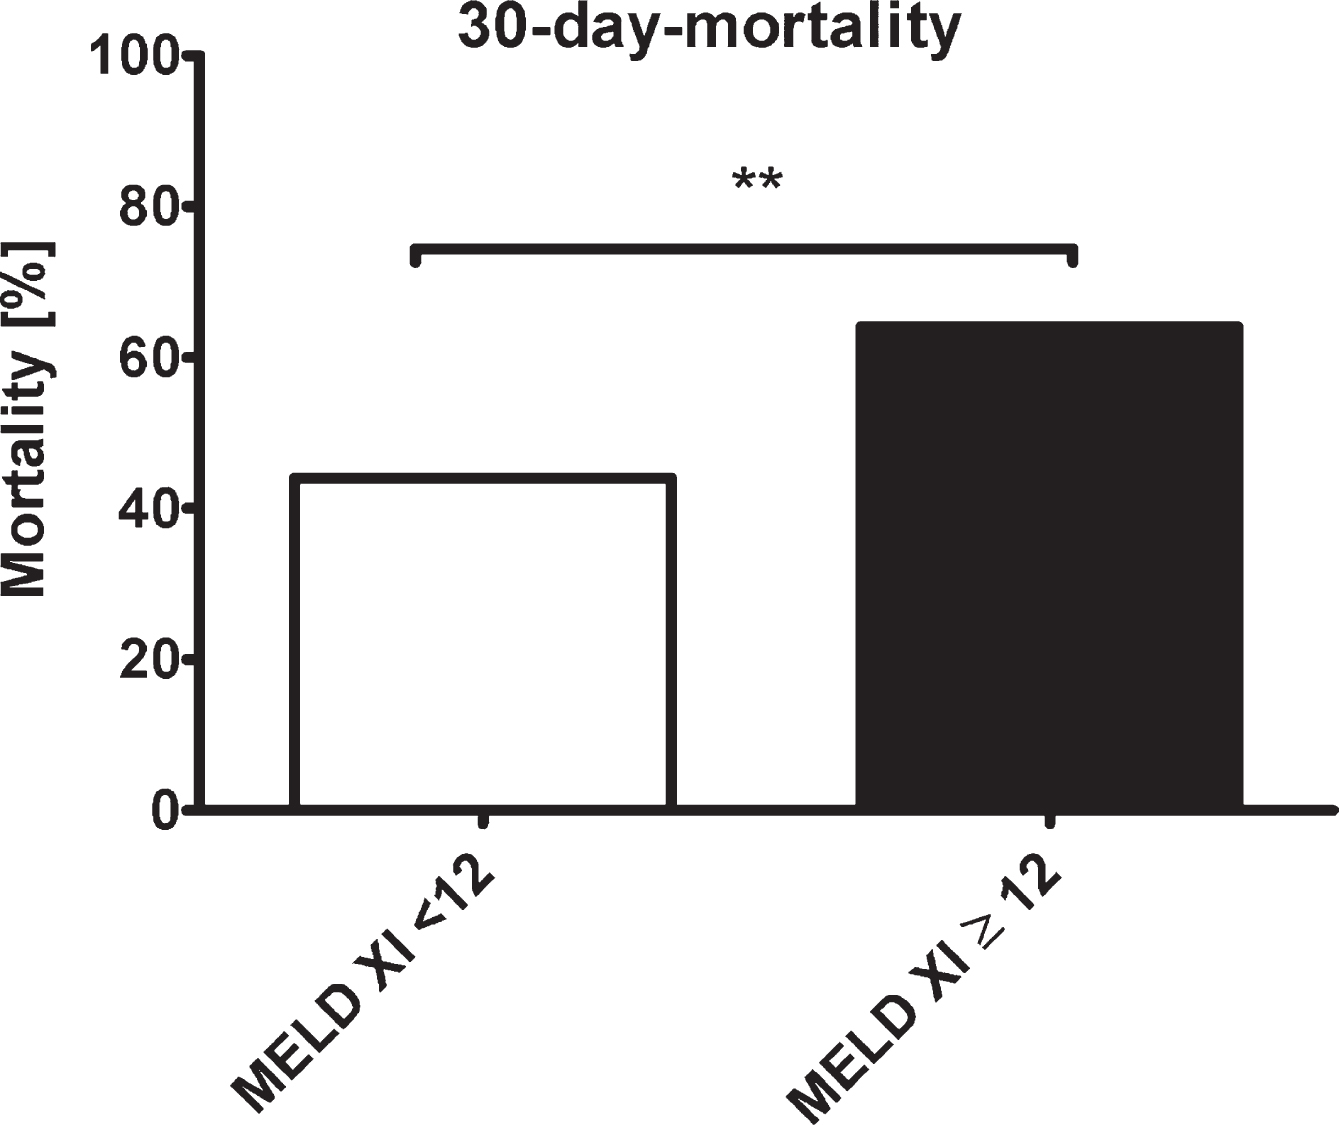 30-days-mortality in patients with MELD-XI <12 (white) and MELD-XI≥12 (black). **= p < 0.01; MELD - Model for End-Stage Liver Disease.